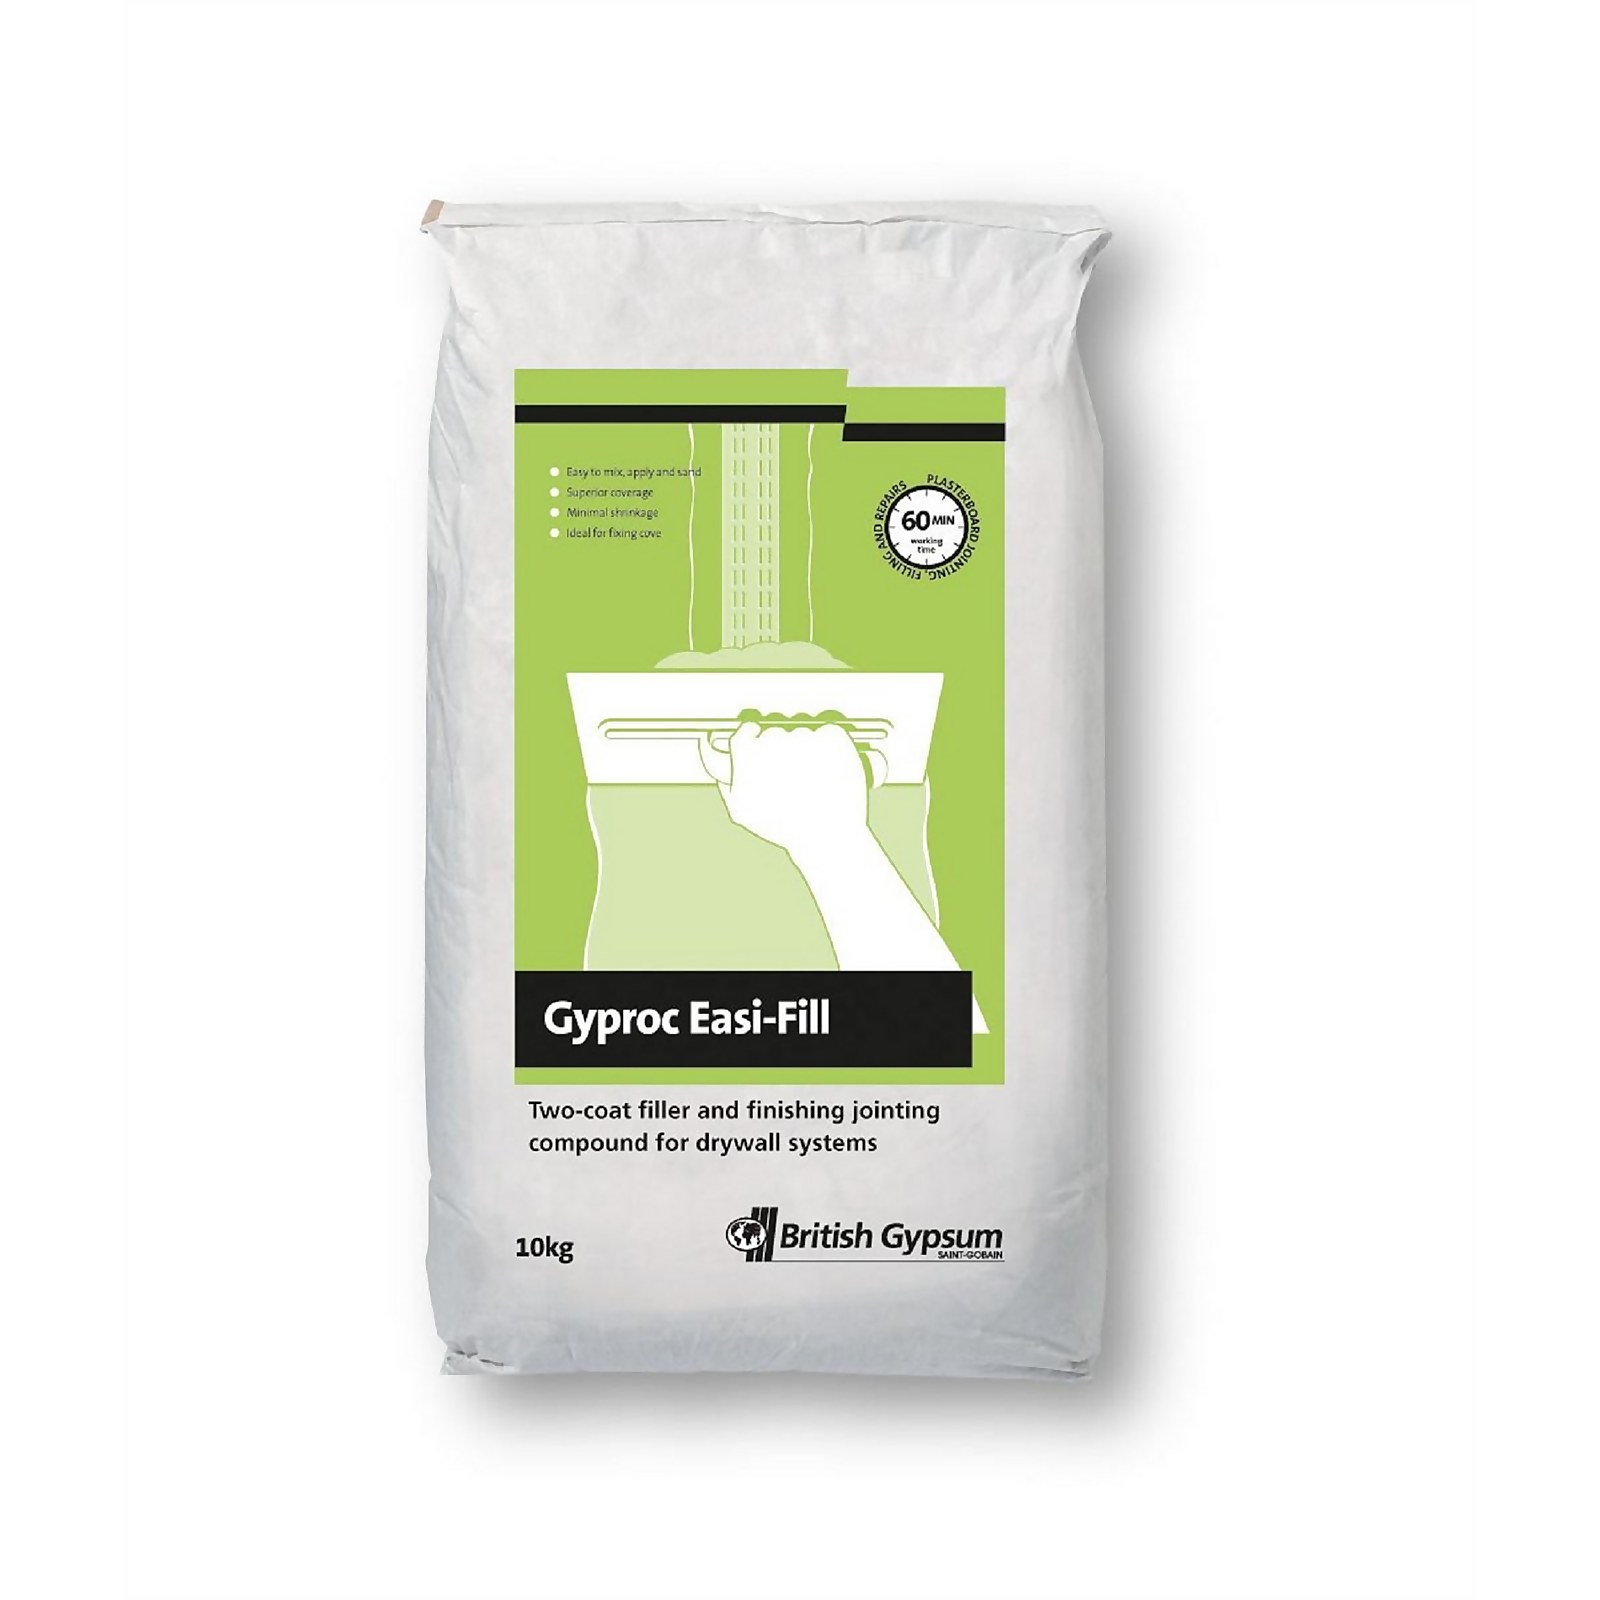 Photo of Gyproc Easi-fill - 10kg